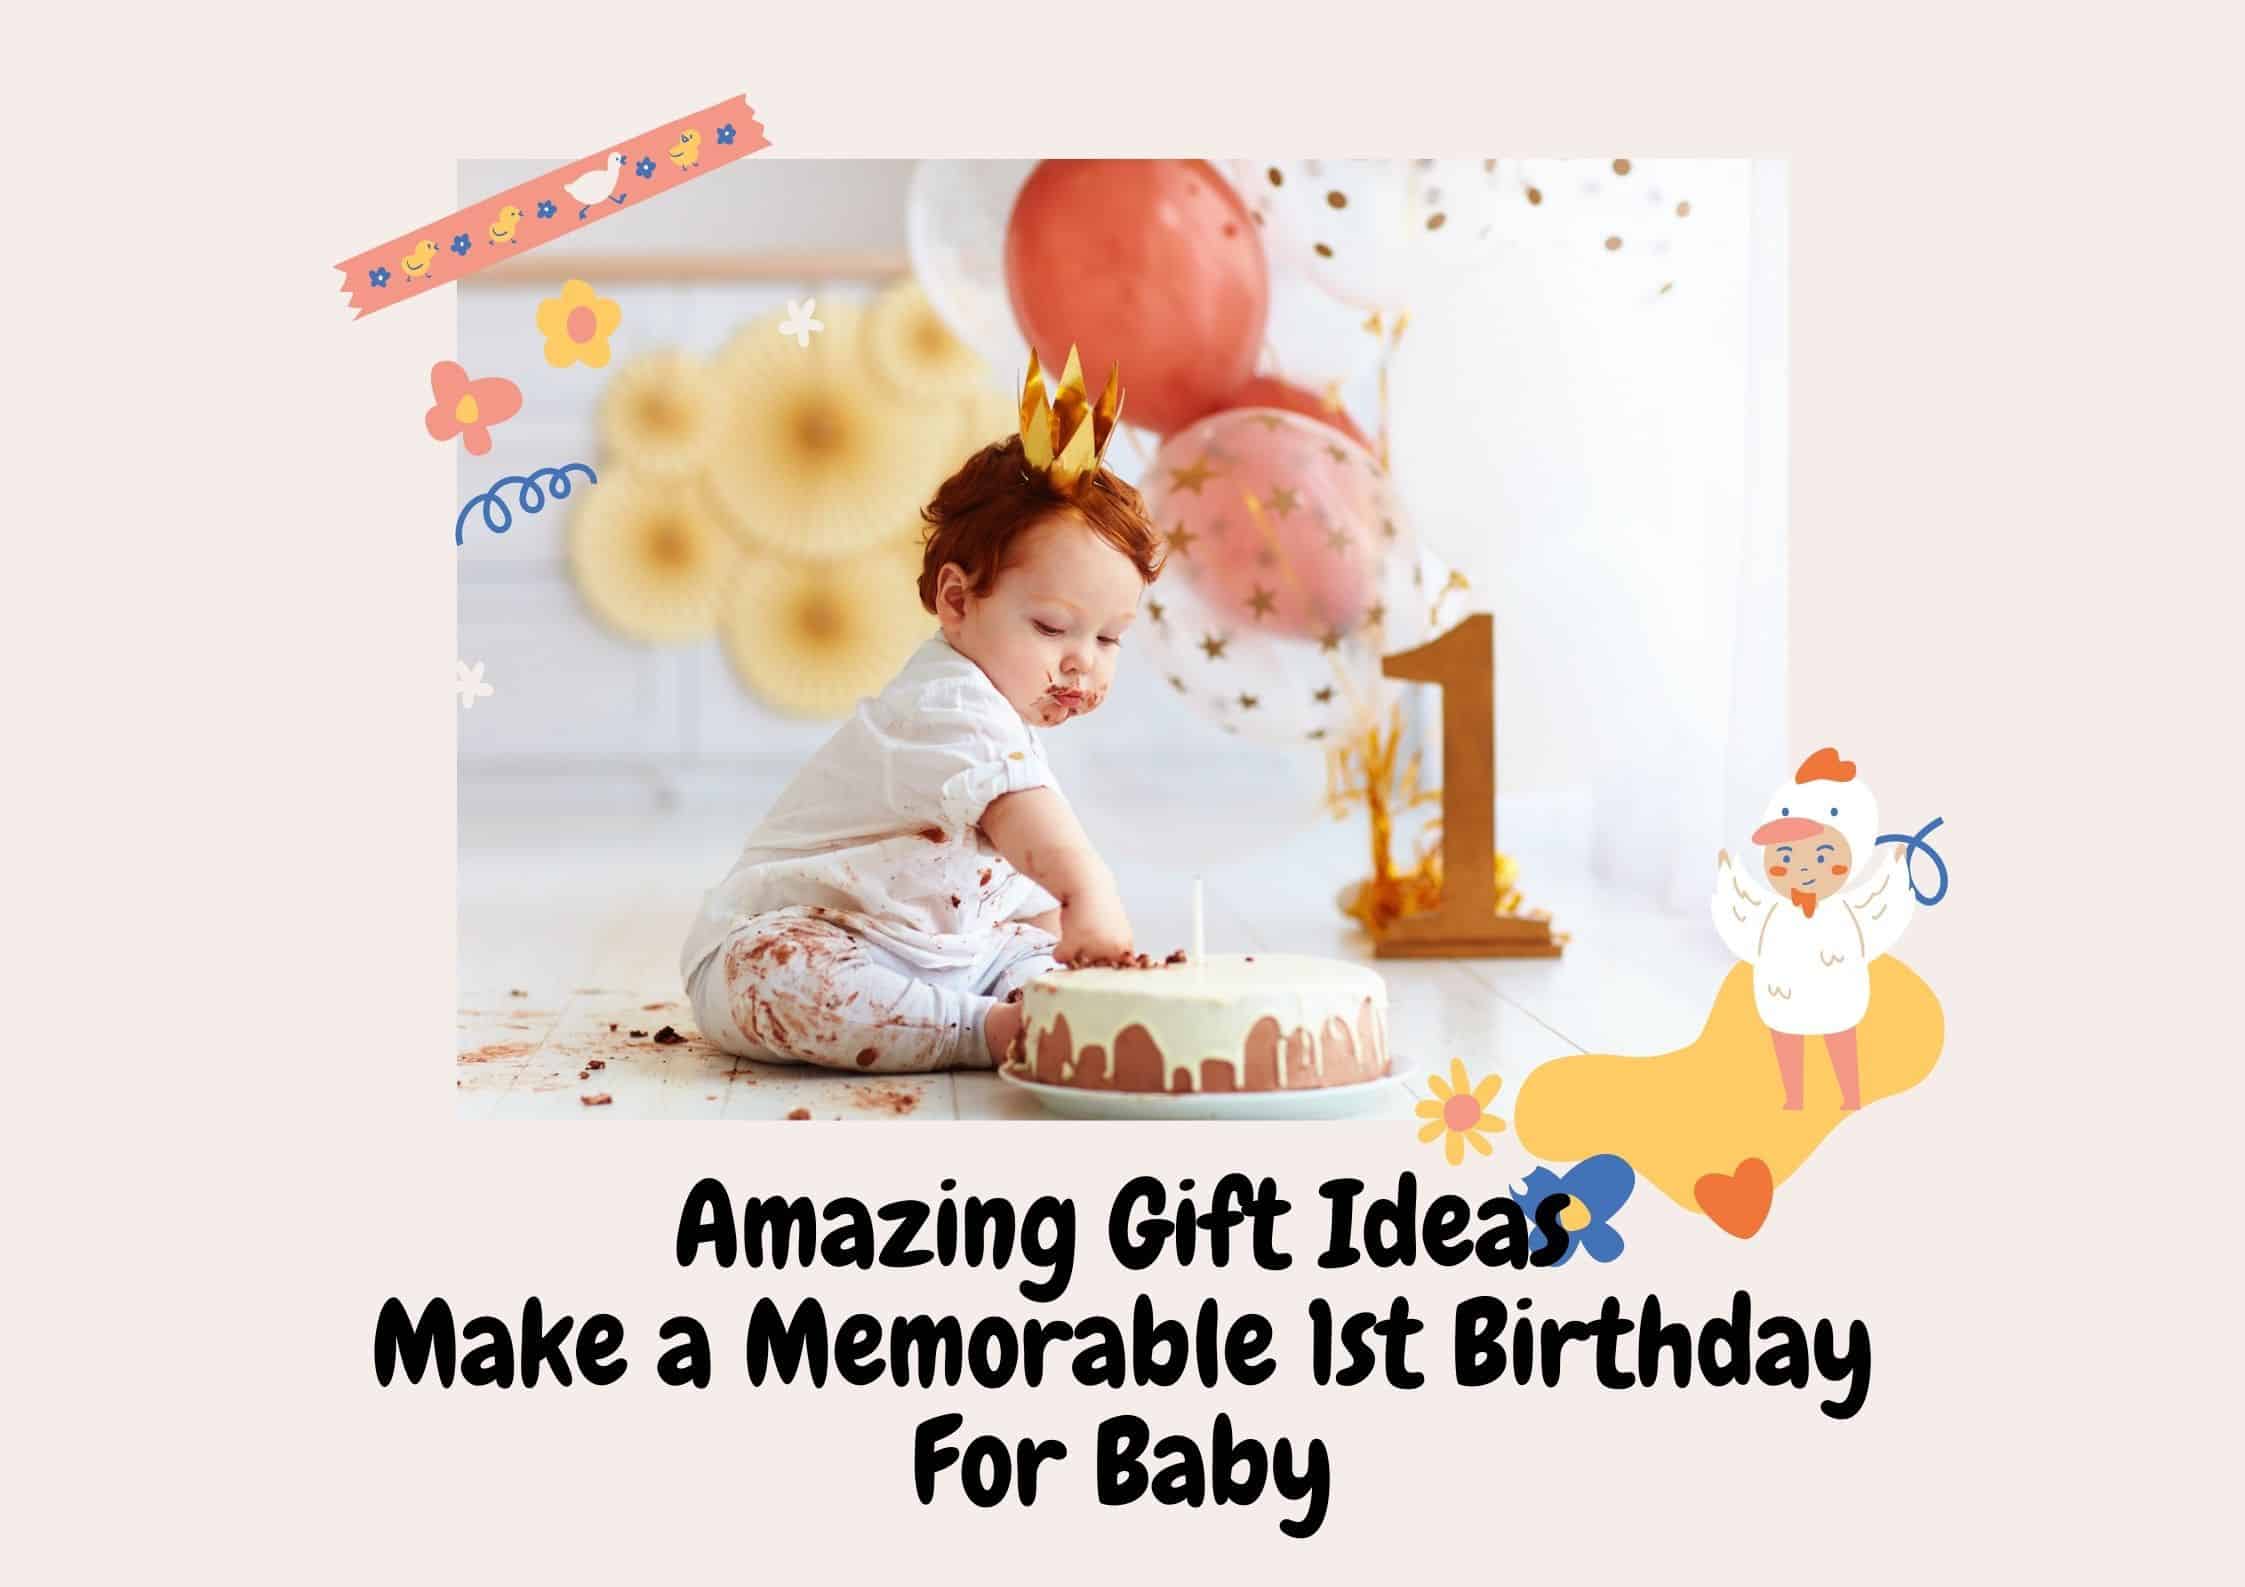 Amazing Gift Ideas Make a Memorable 1st Birthday For Baby